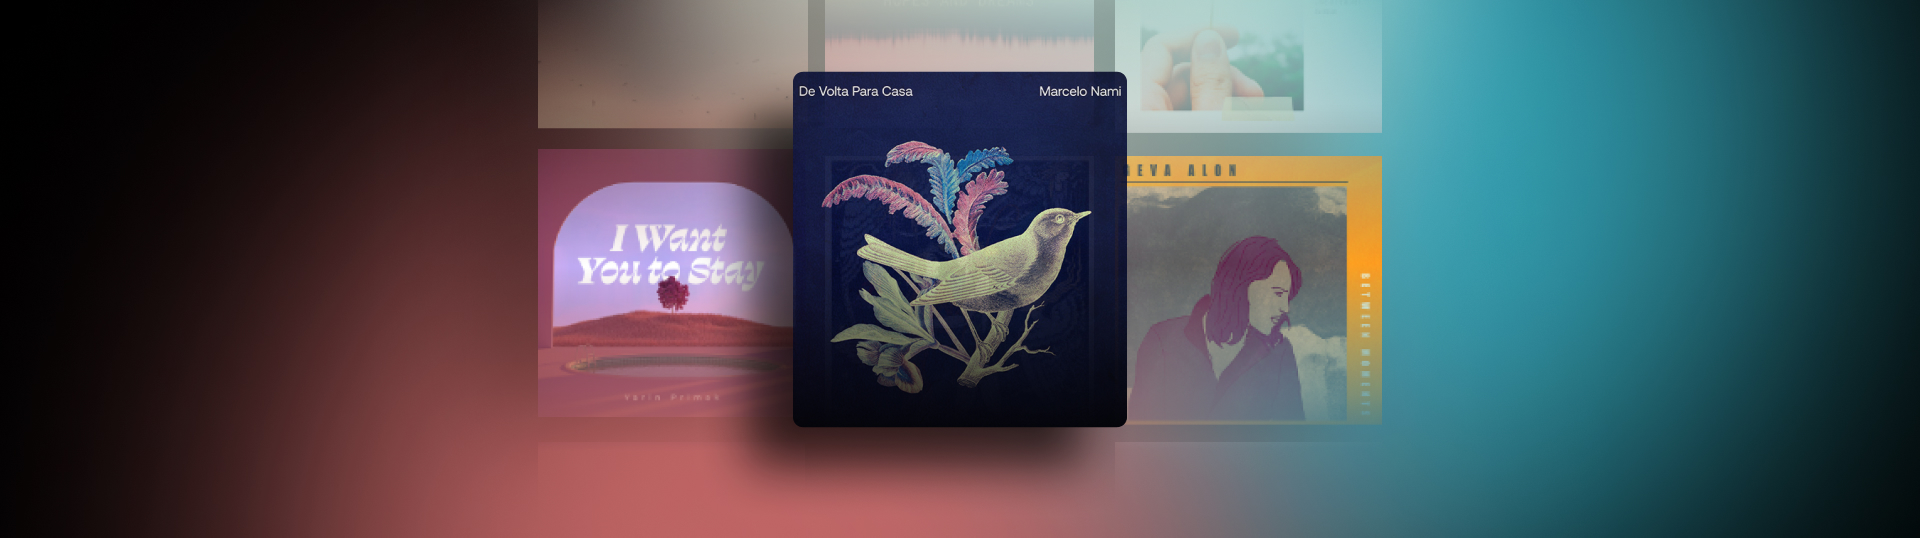 Images of music albums with a springtime theme